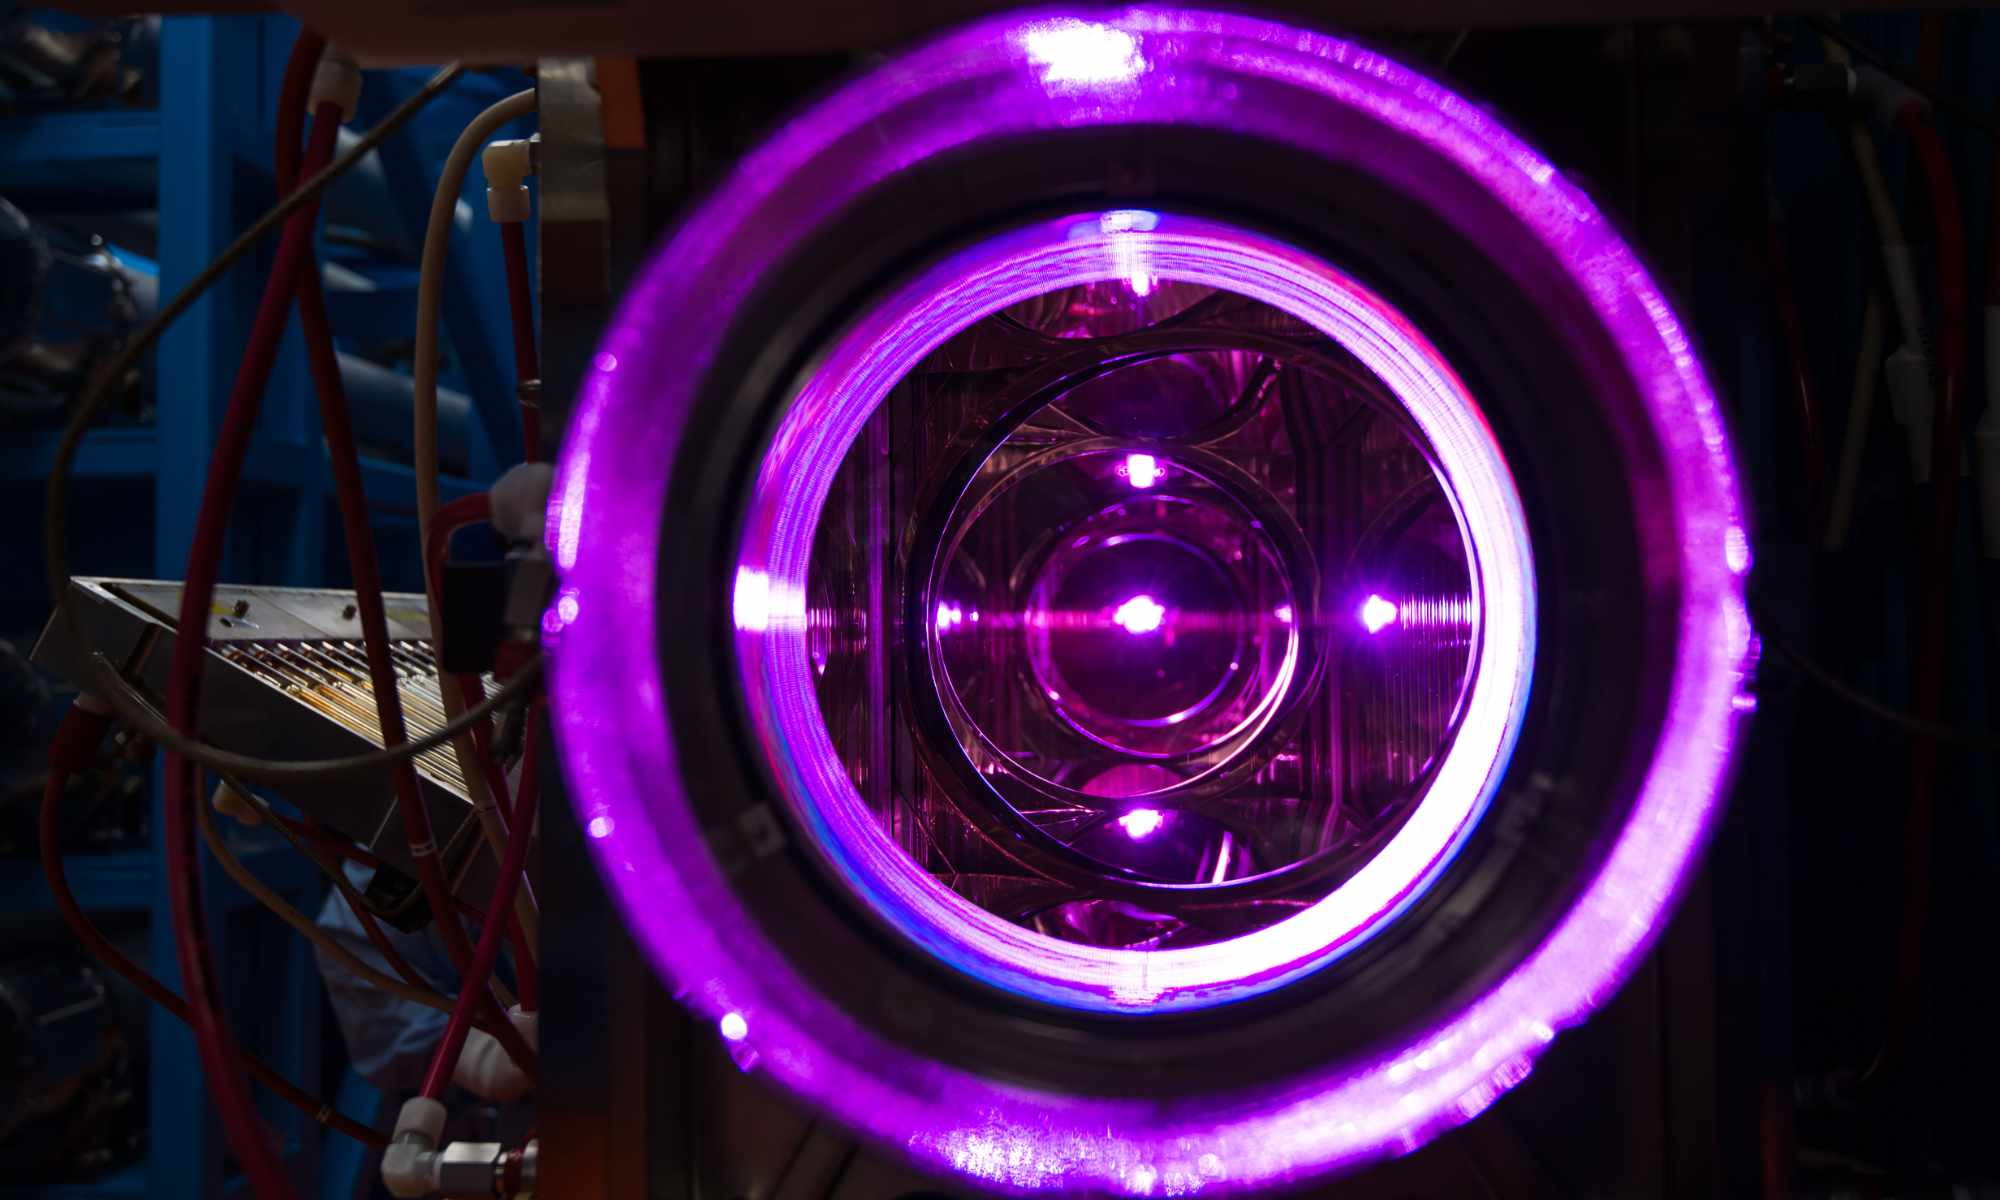 Viewed through the OMEGA laser's 20cm disc amplifiers show several concentric circles of electric purple.